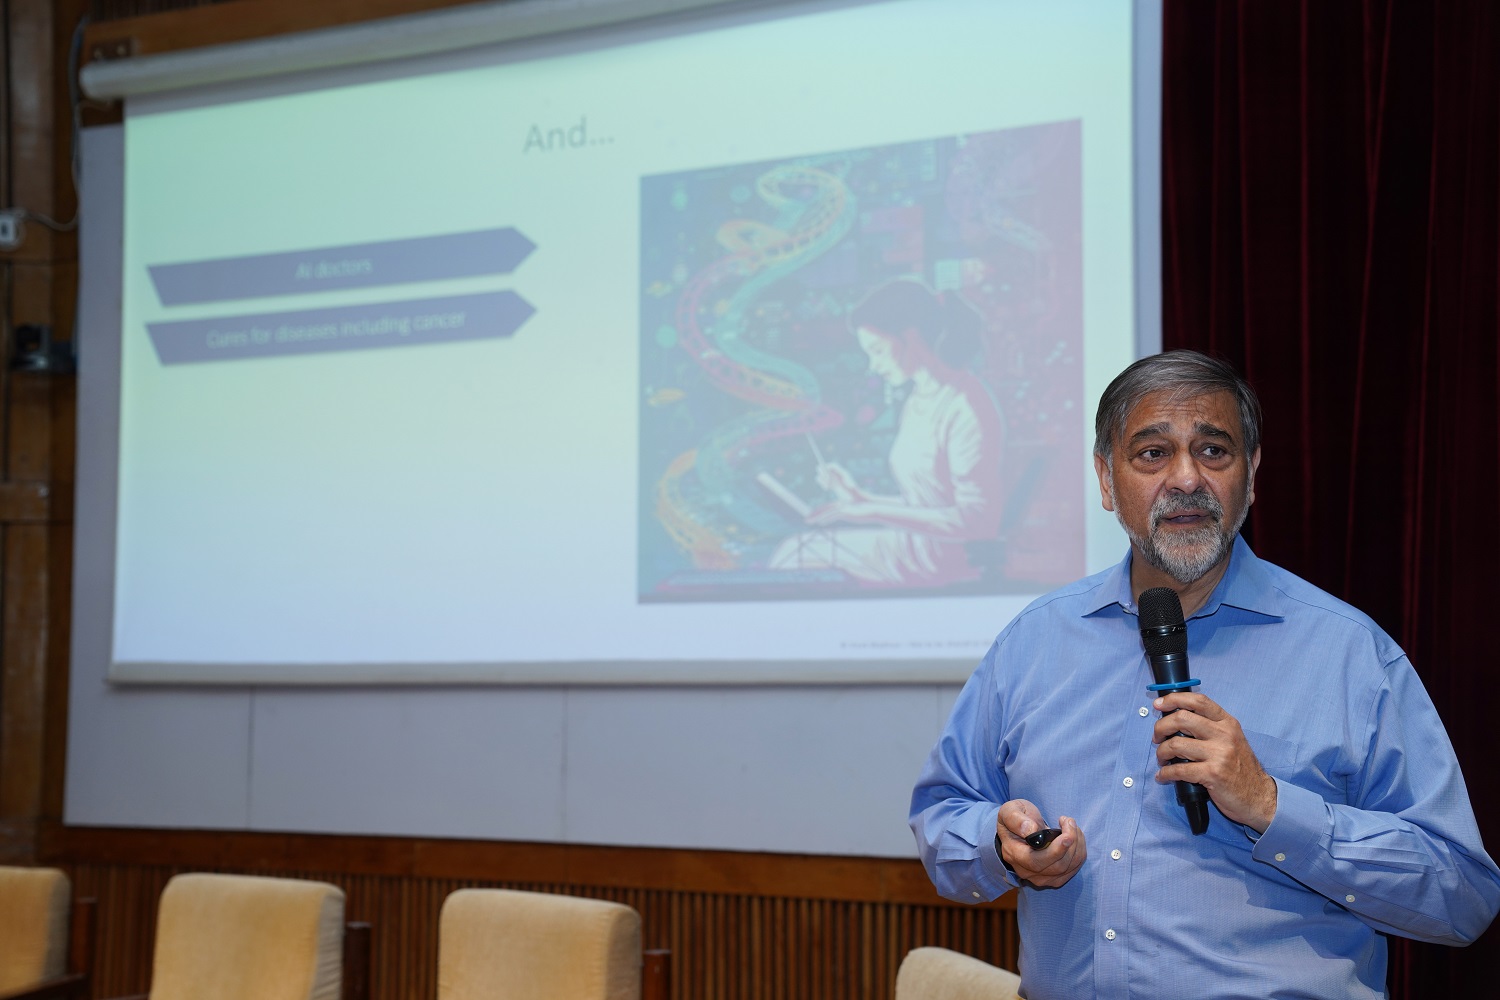 Vivek Wadhwa, author and entrepreneur, speaks on 'Opportunities to solve humanity's grand challenges'.